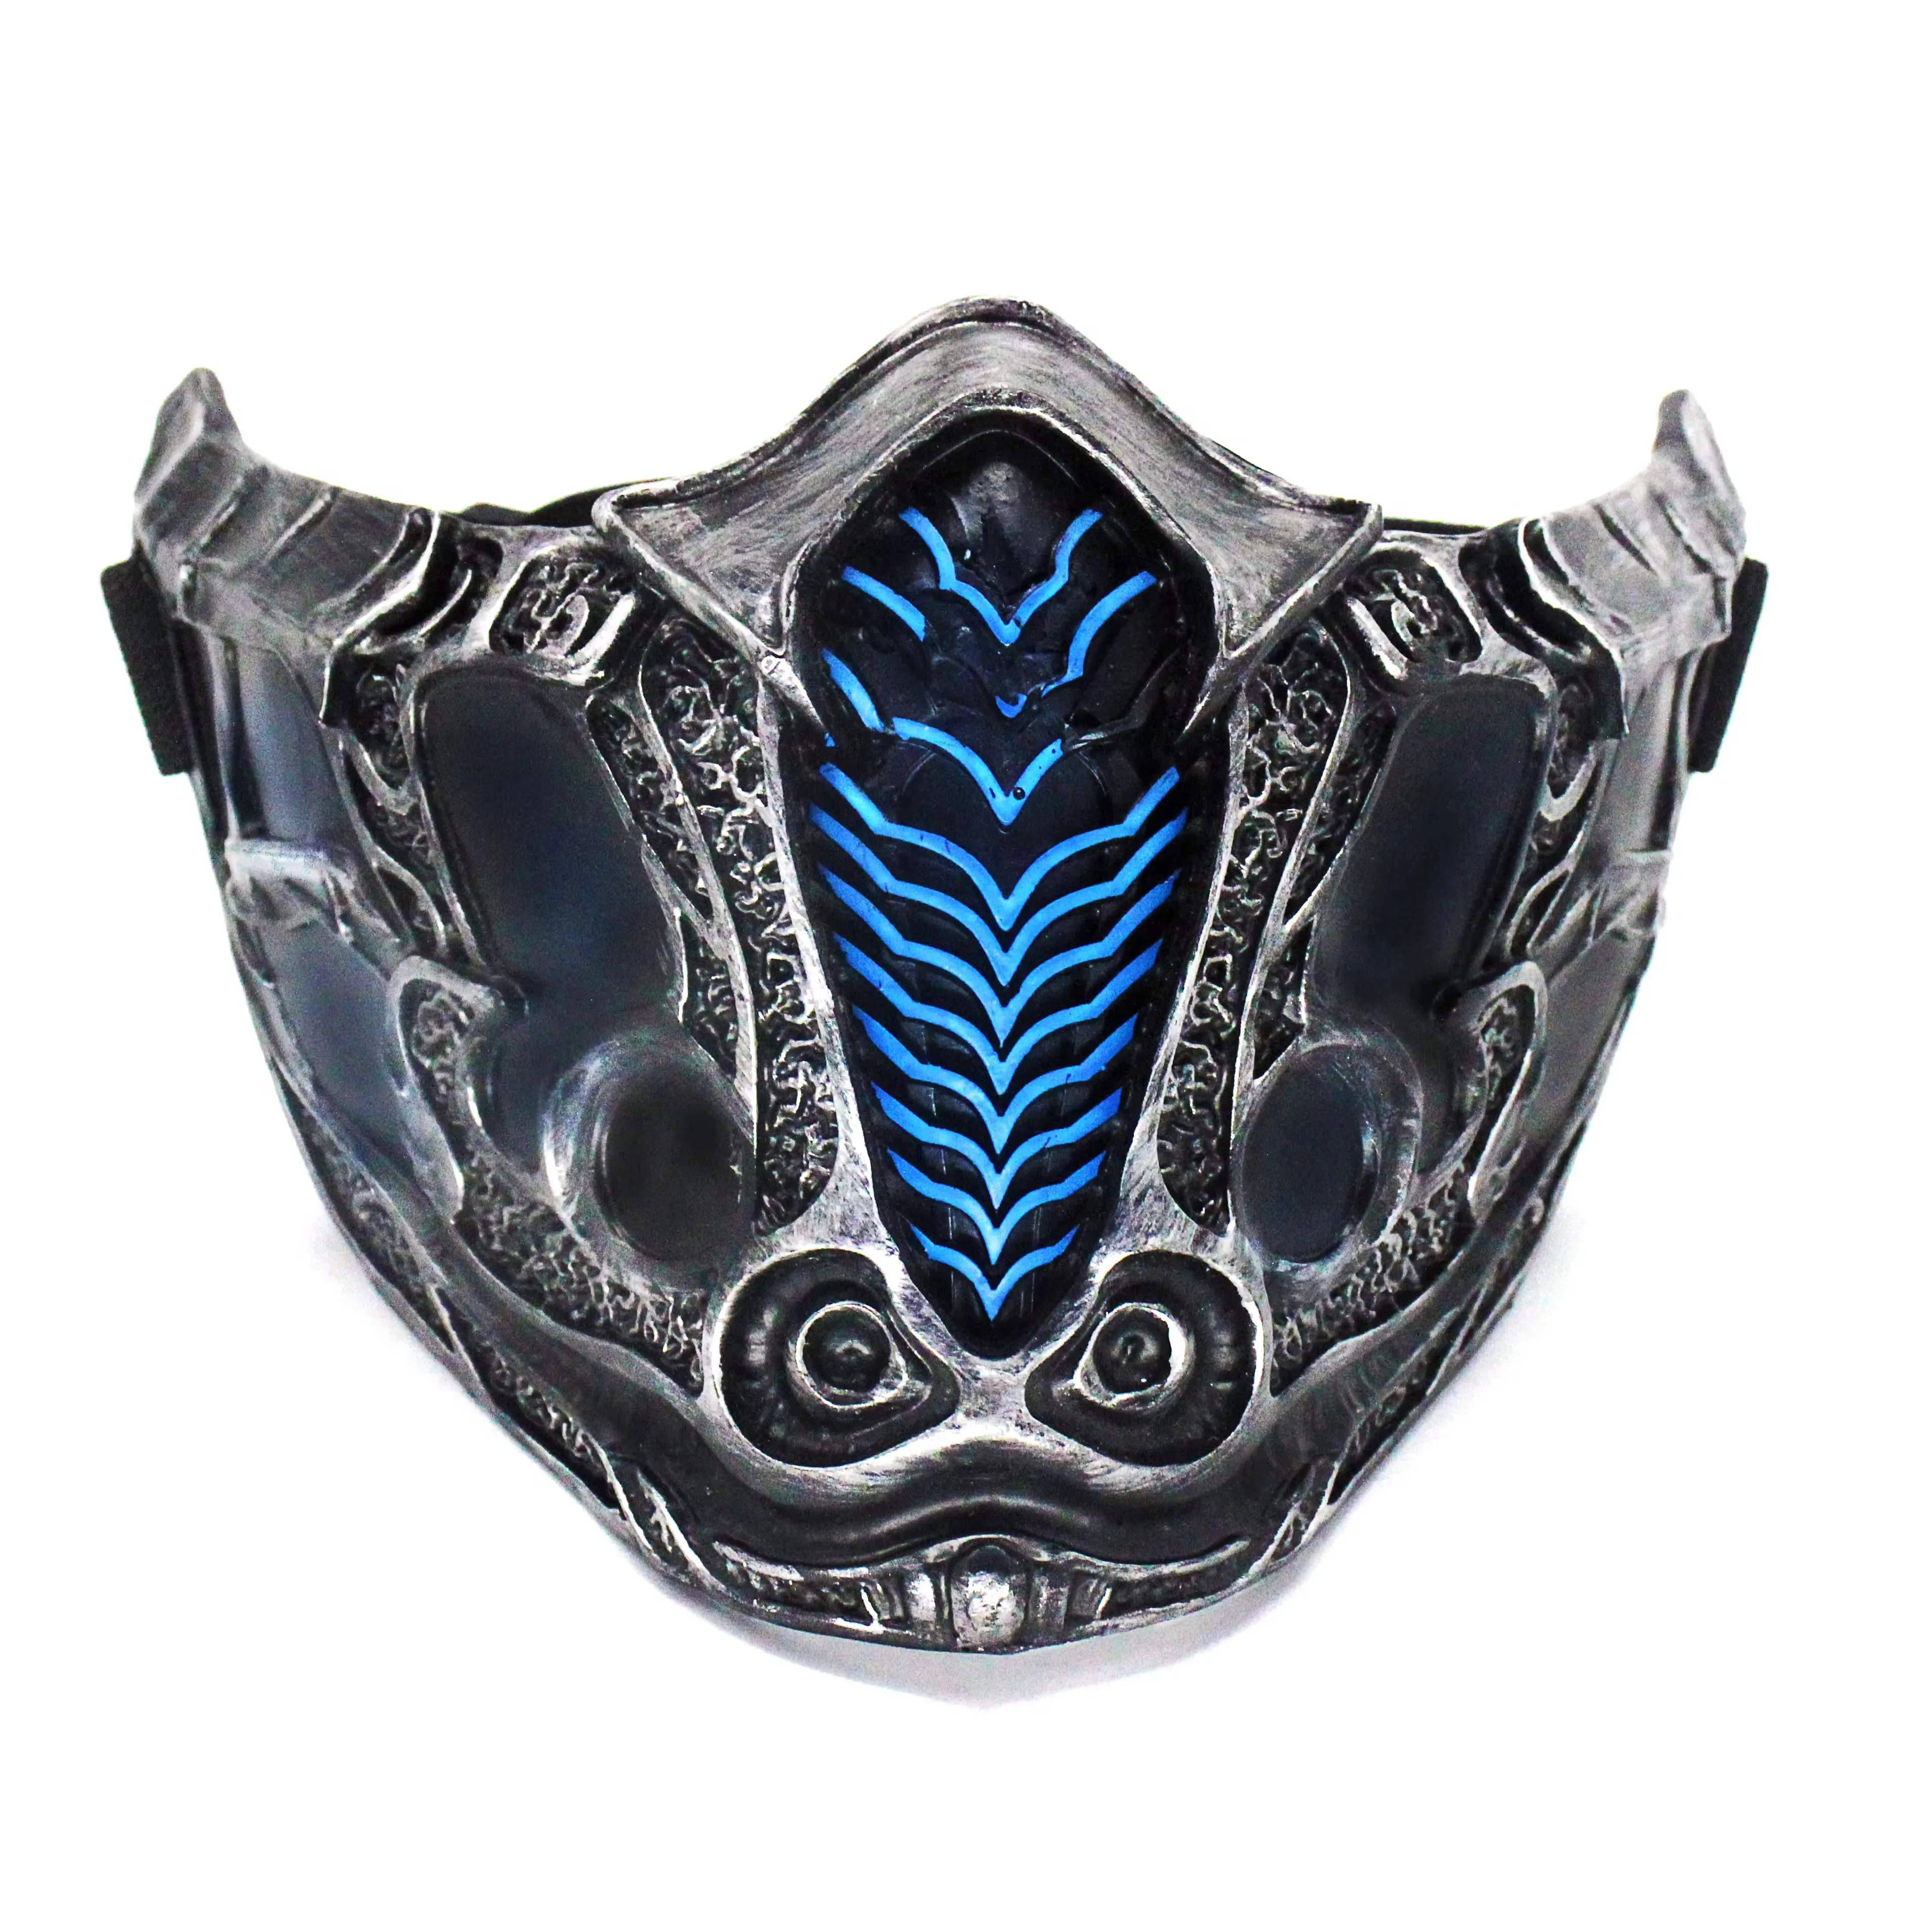 

Subzero/Scorpion Warrior Mask Half Face Resin Game Surrounding Mask Role Playing Props Adult